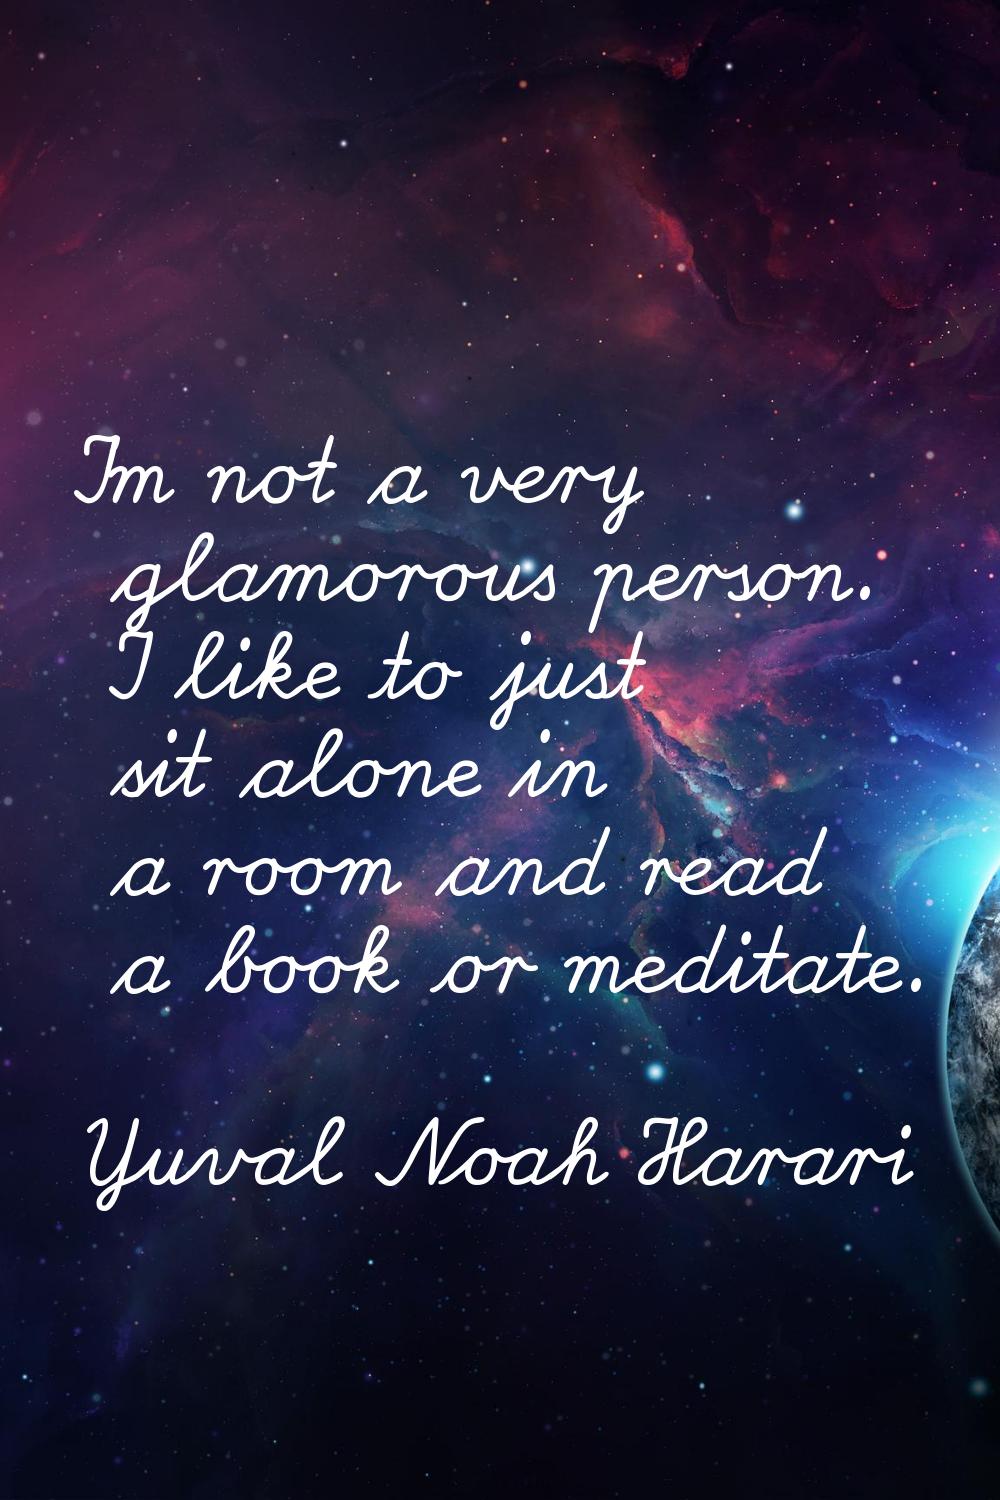 I'm not a very glamorous person. I like to just sit alone in a room and read a book or meditate.